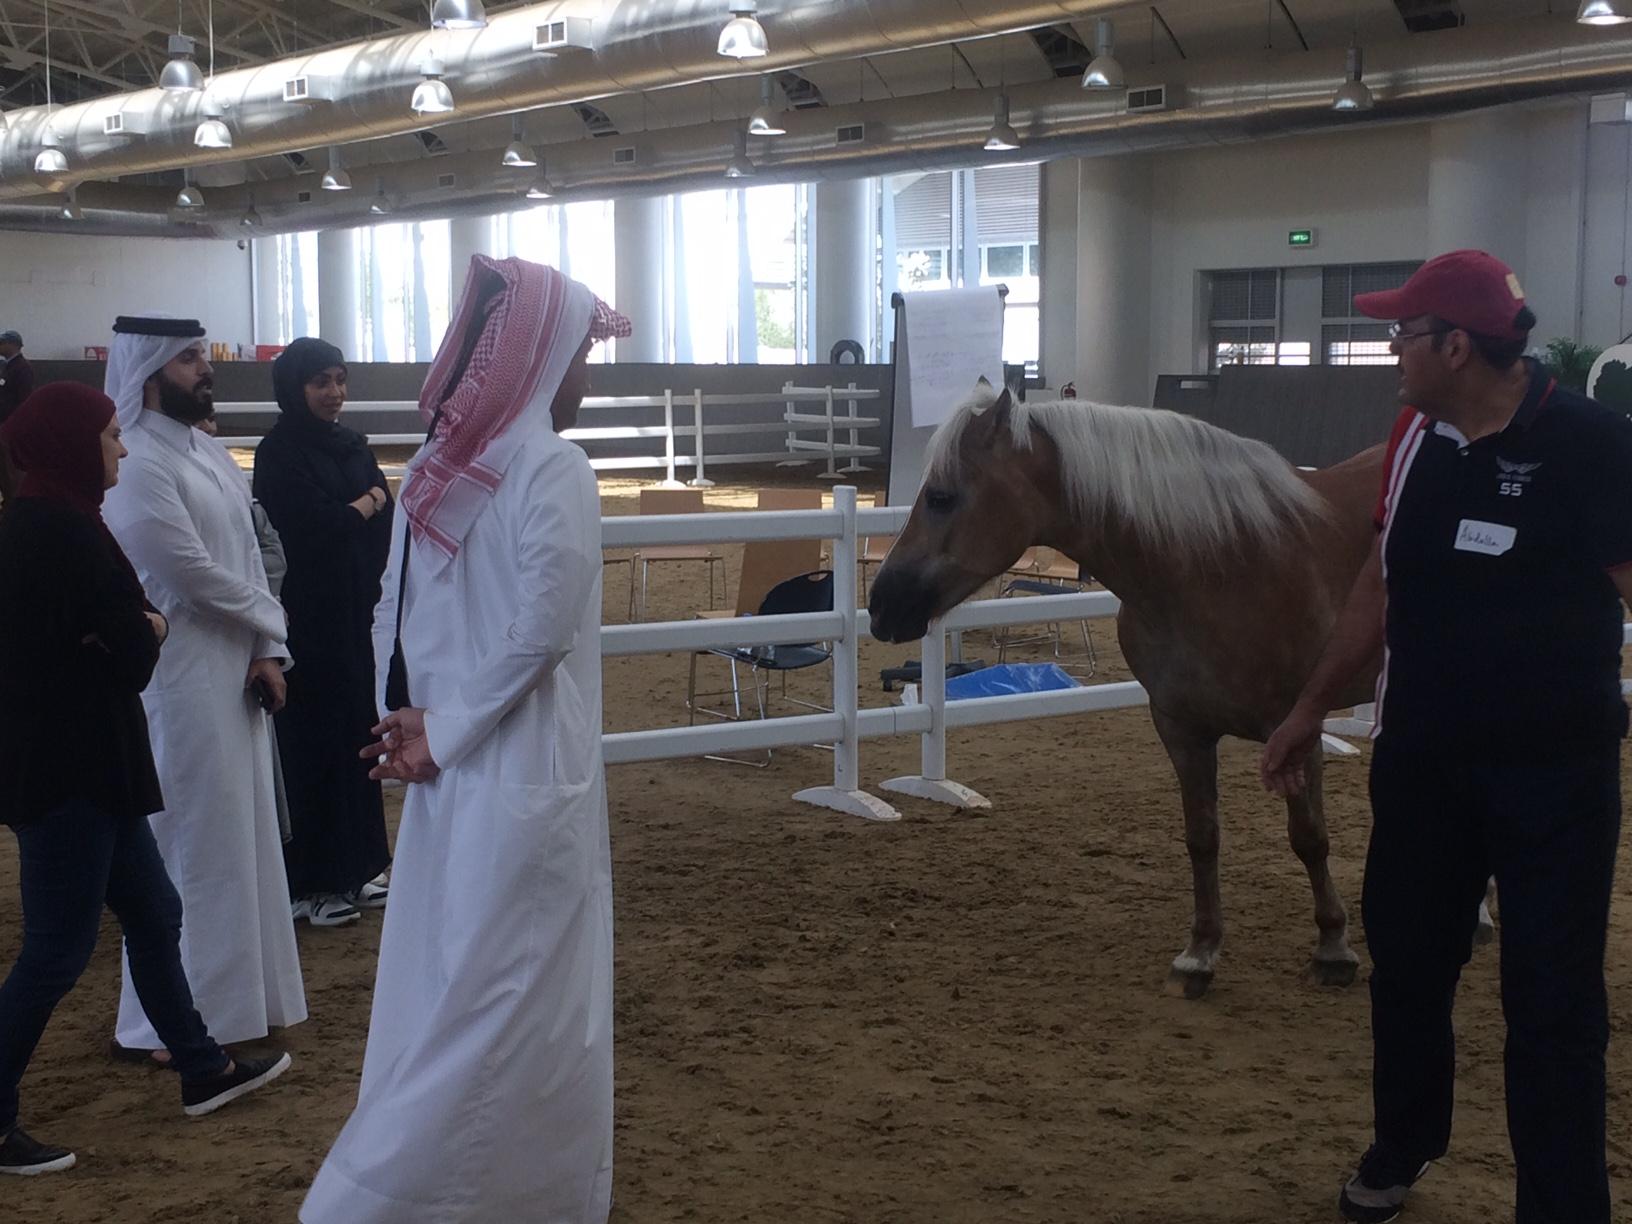 Lissa Pohl conducts leadership training using horses in Qatar